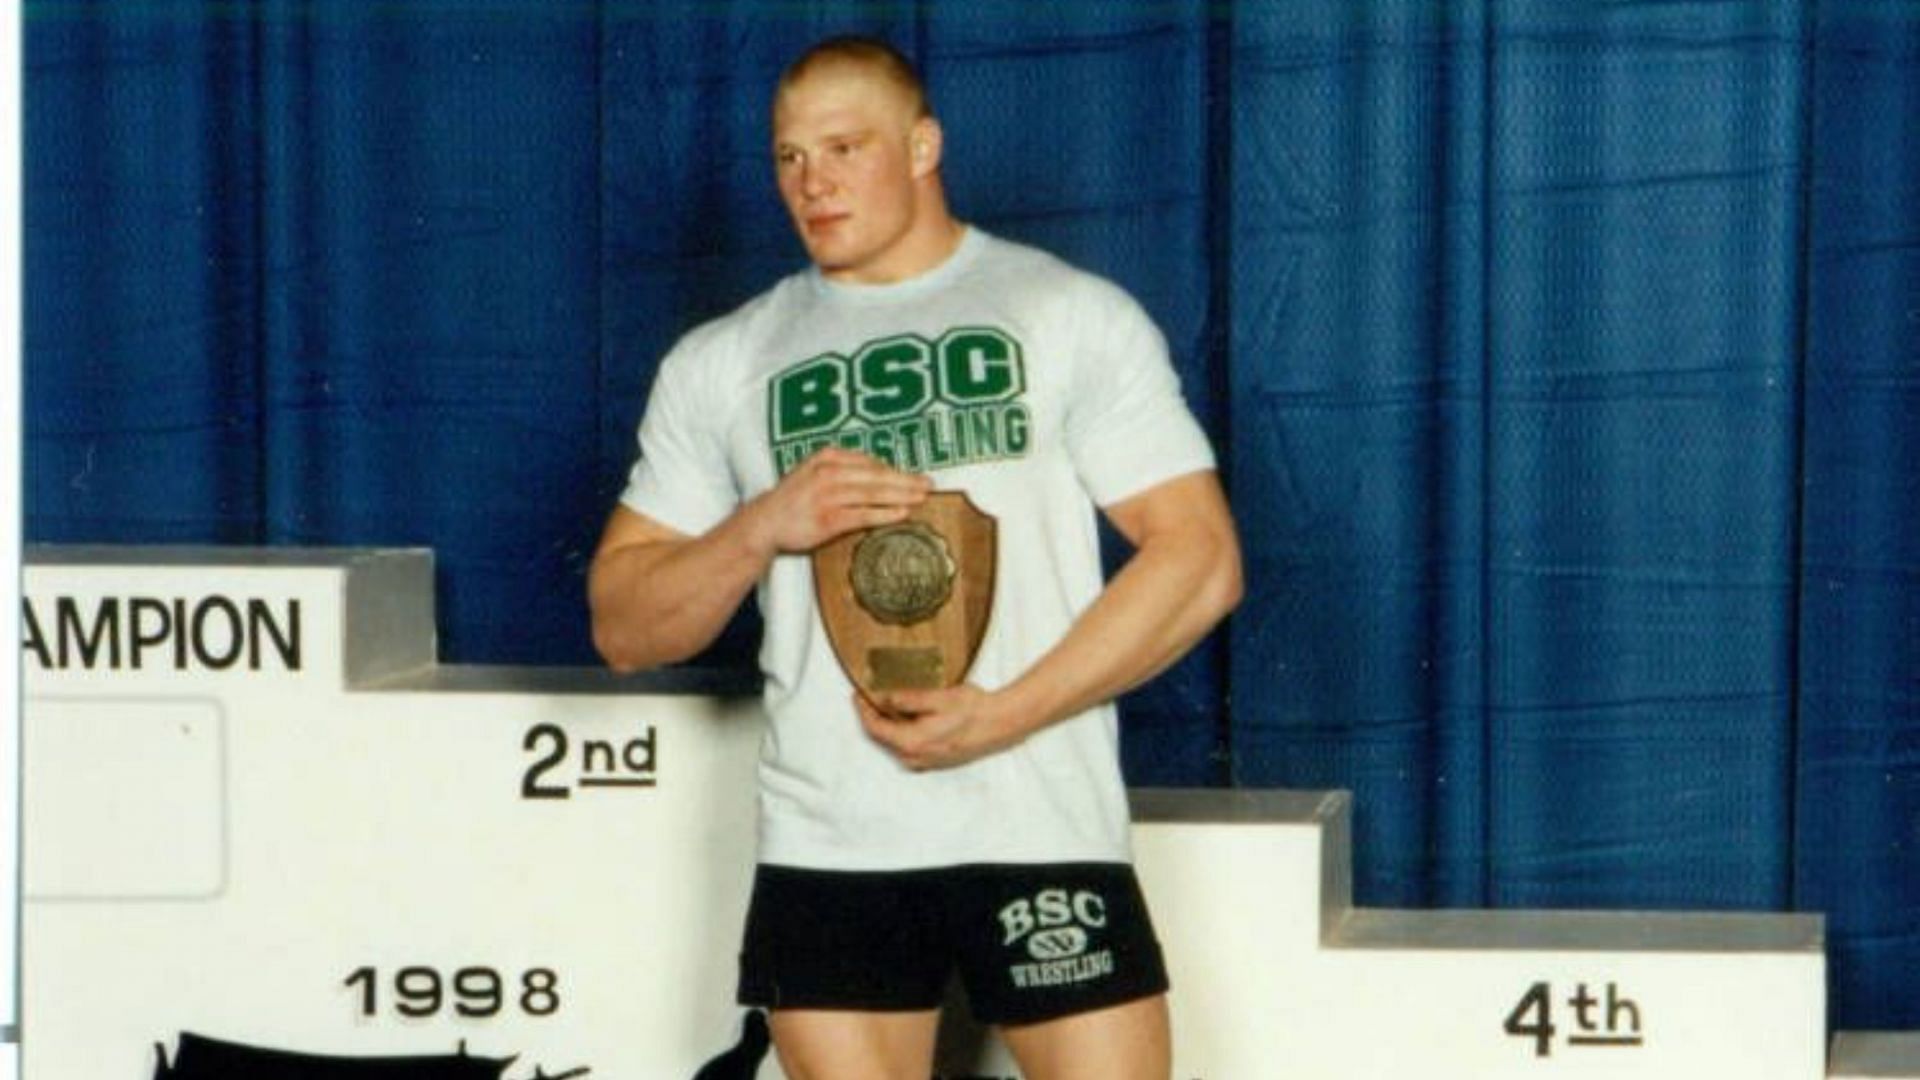 Brock Lesnar worked as a laborer for the REA power company in Webster